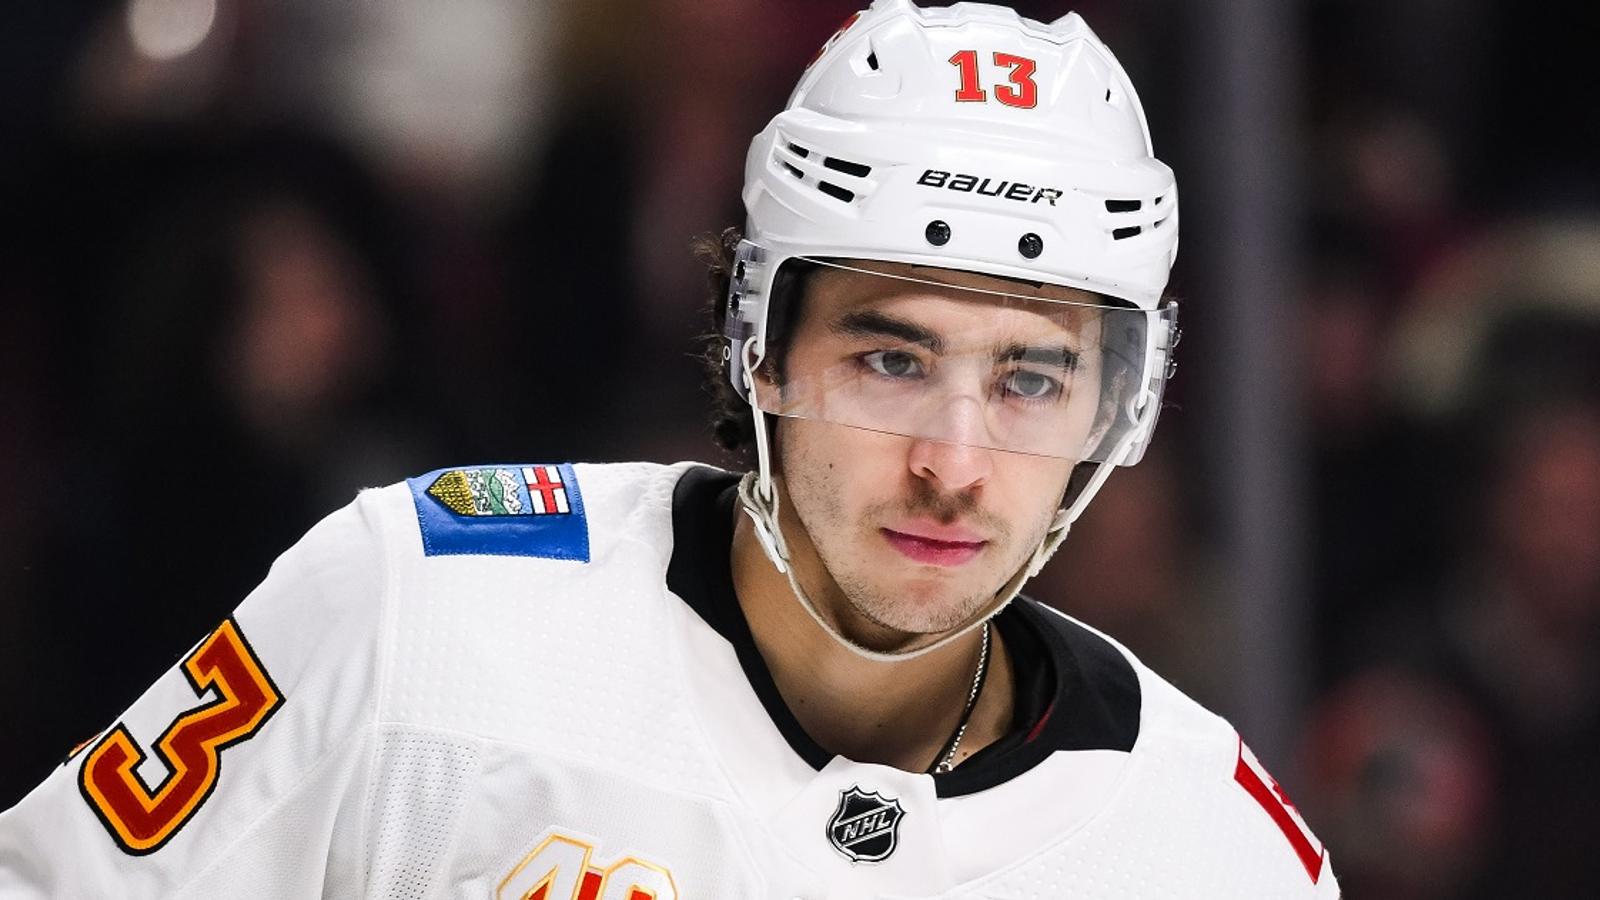 Gaudreau: I couldn't care less what they do as a team.